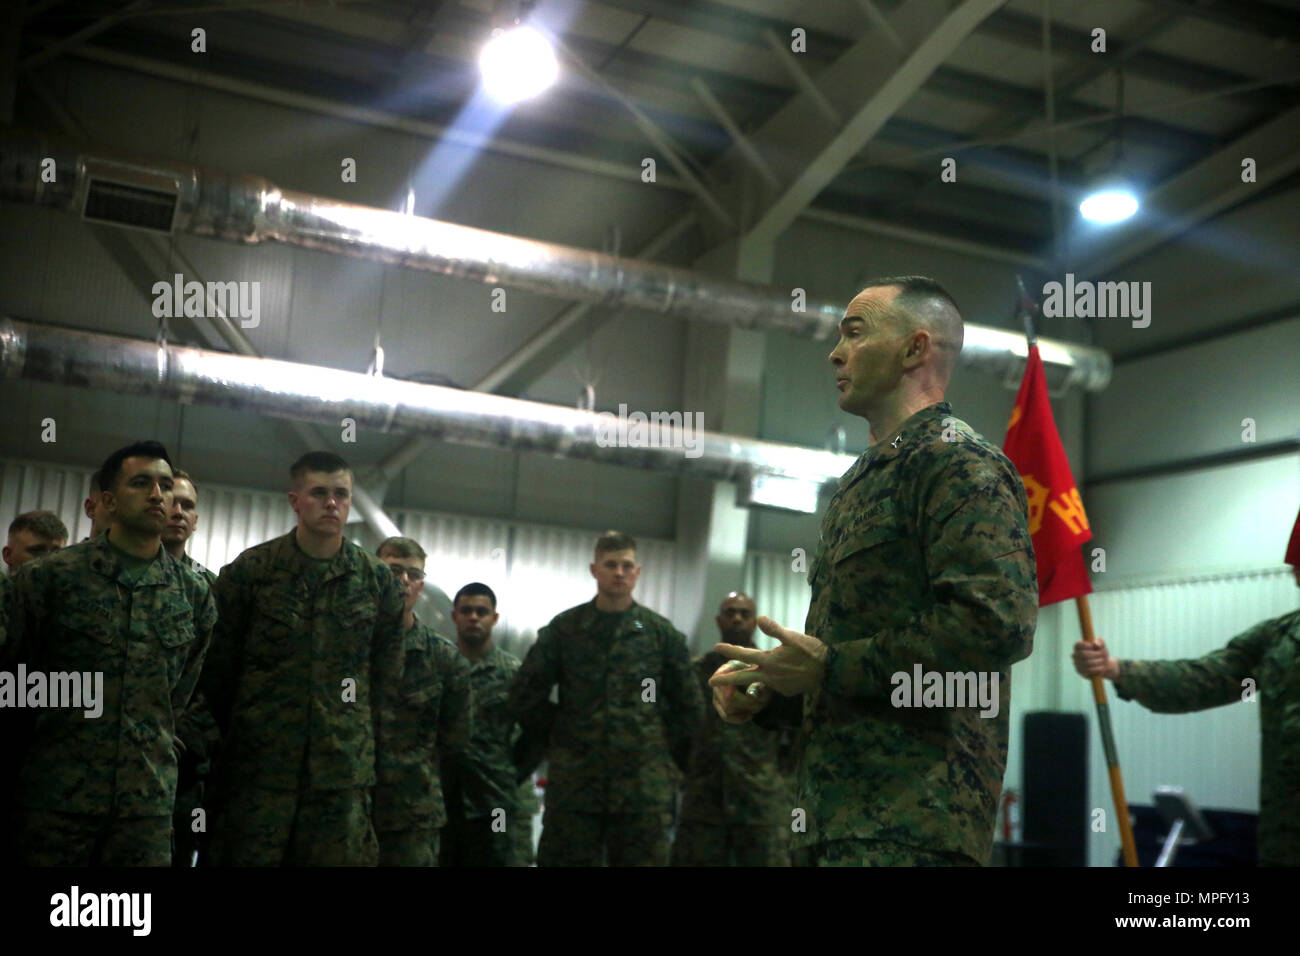 Maj. Gen. John K. Love speaks to Marines with Black Sea Rotational Force 17.1 during his visit to Mihail Kogalniceanu Air Base, Romania, March 9, 2017. The visit allowed Love to speak with forward deployed Marines and answer question concerning the mission of BSRF 17.1. Love is the commanding general of 2nd Marine Division. (U.S. Marine Corps photo by Cpl. Sean J. Berry) Stock Photo